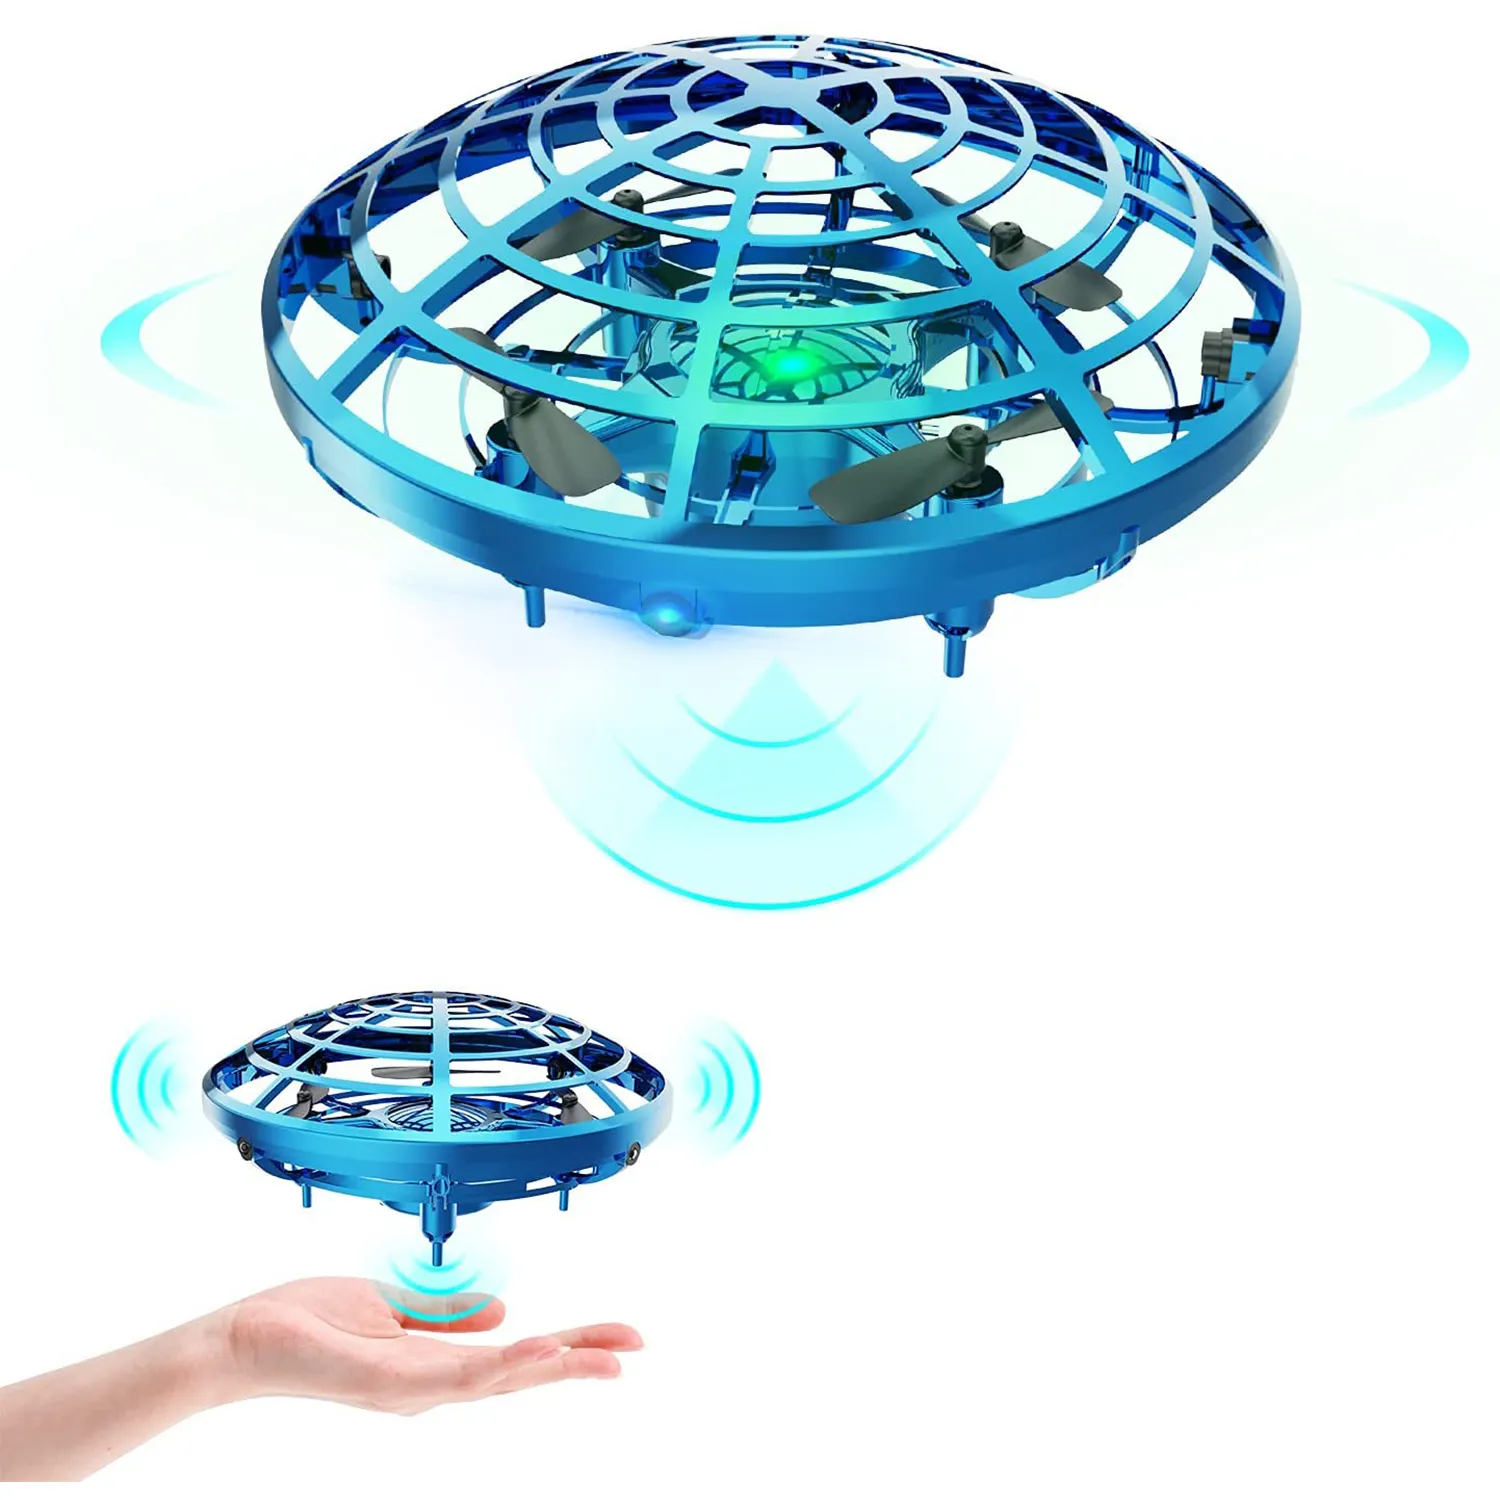 Drone for Kids Toys Hand Operated Mini Drone Toy Motion Sensor Helicopter Outdoor and Indoor UFO Flying Ball